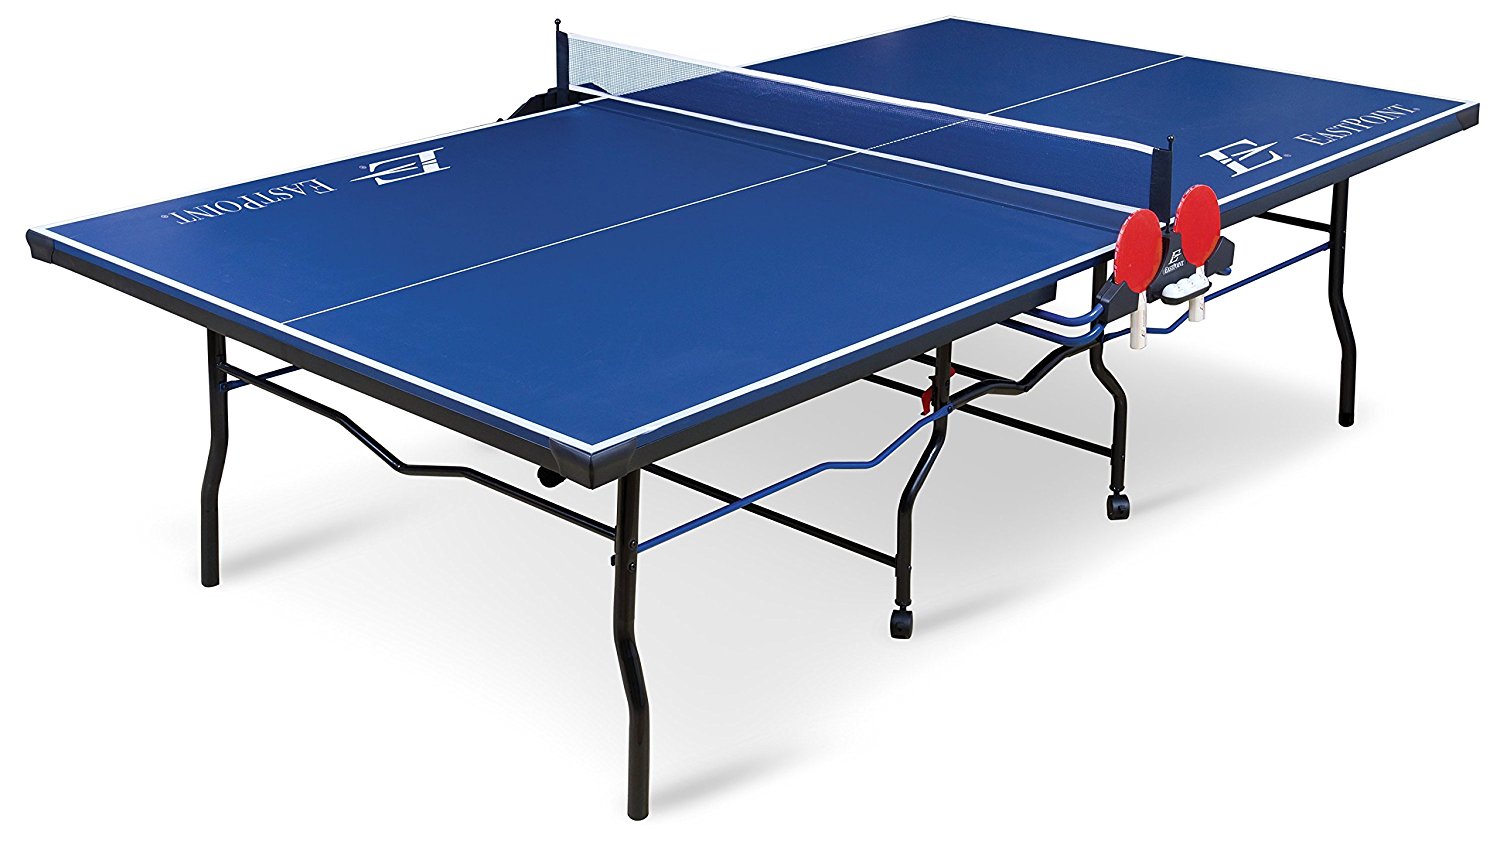 eastpoint sports table tennis table image